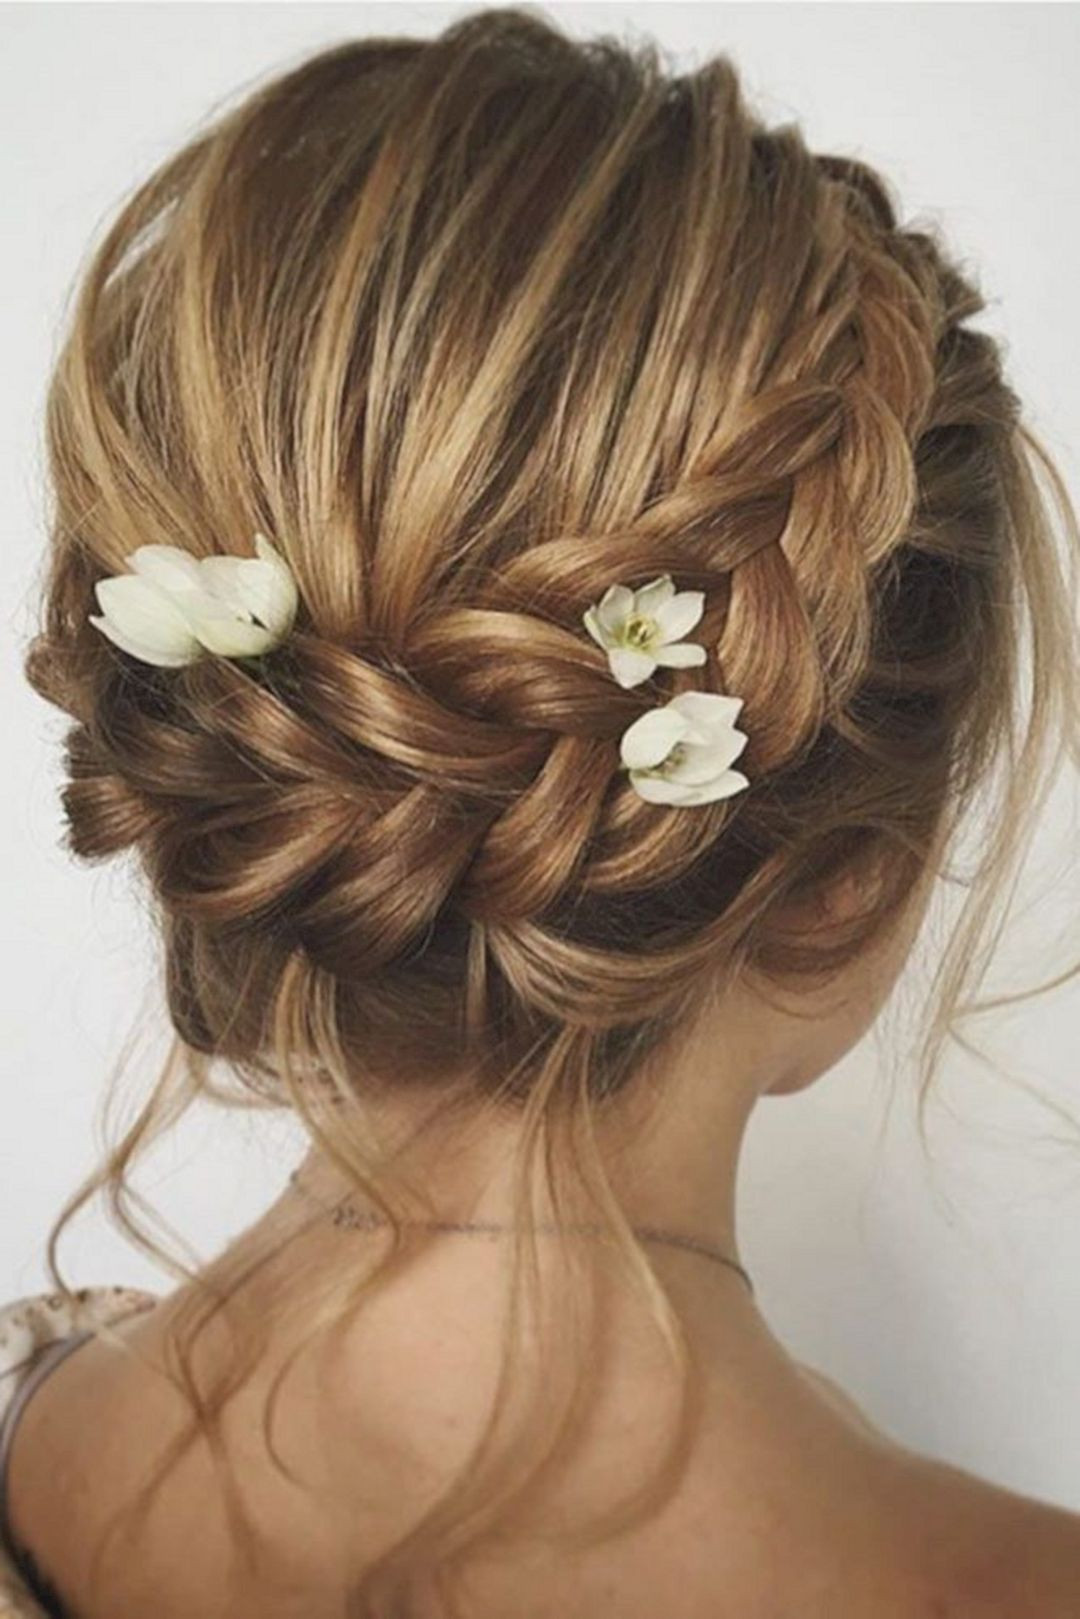 Cute Wedding Hairstyles For Bridesmaids
 Wedding Bridesmaid Hairstyles for Short Hairs – OOSILE